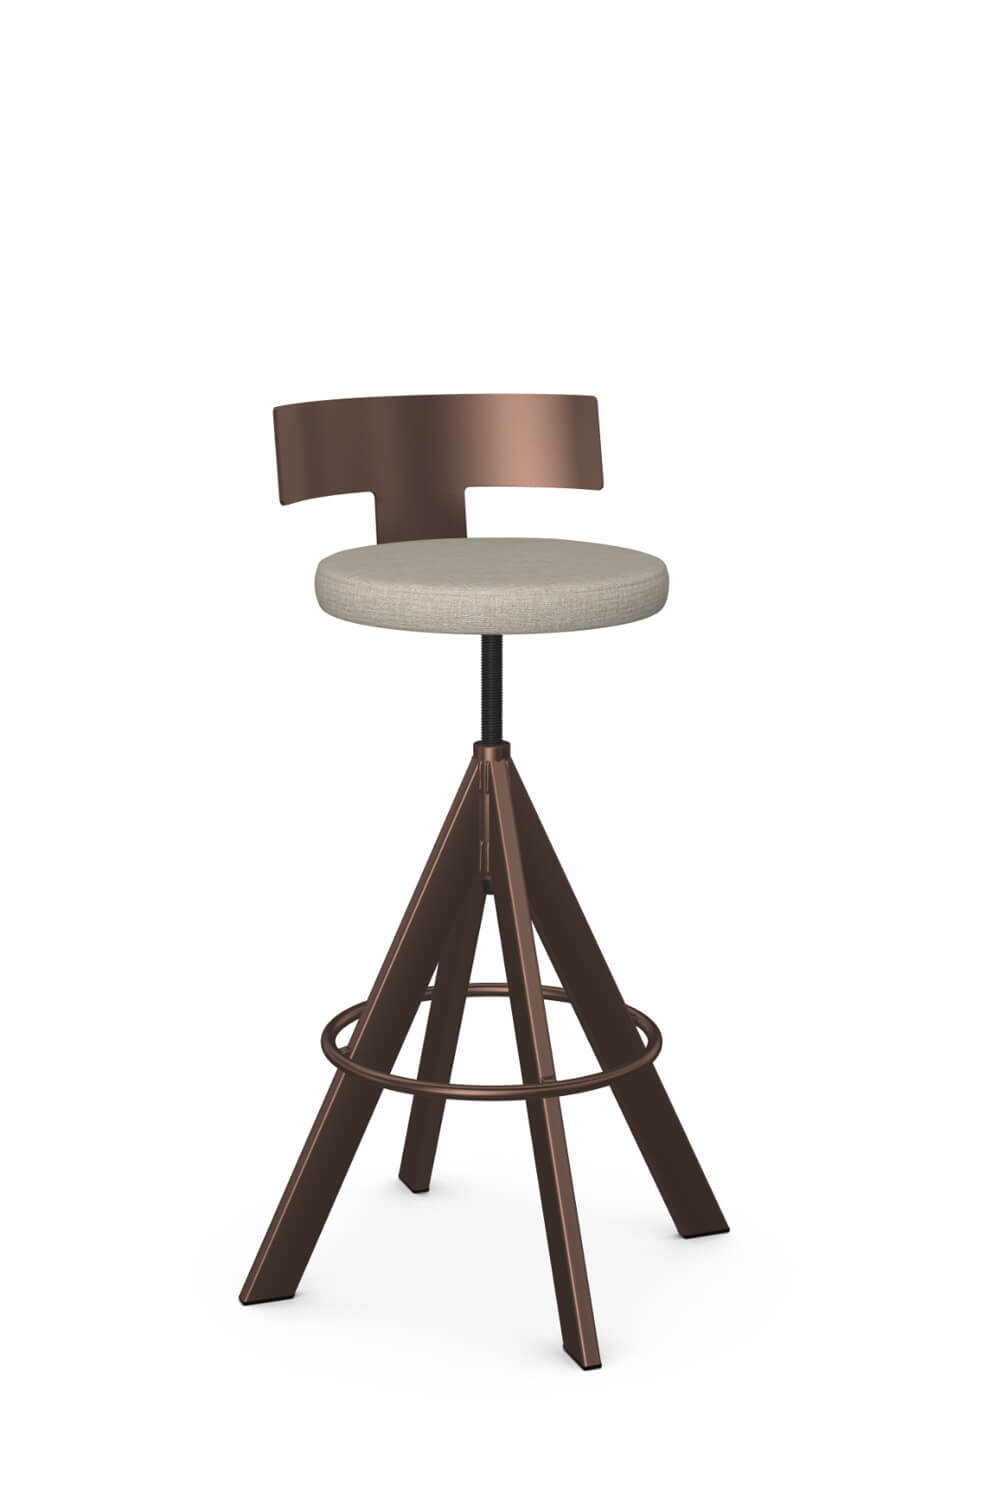 Upright Industrial Stool with Seat Cushion